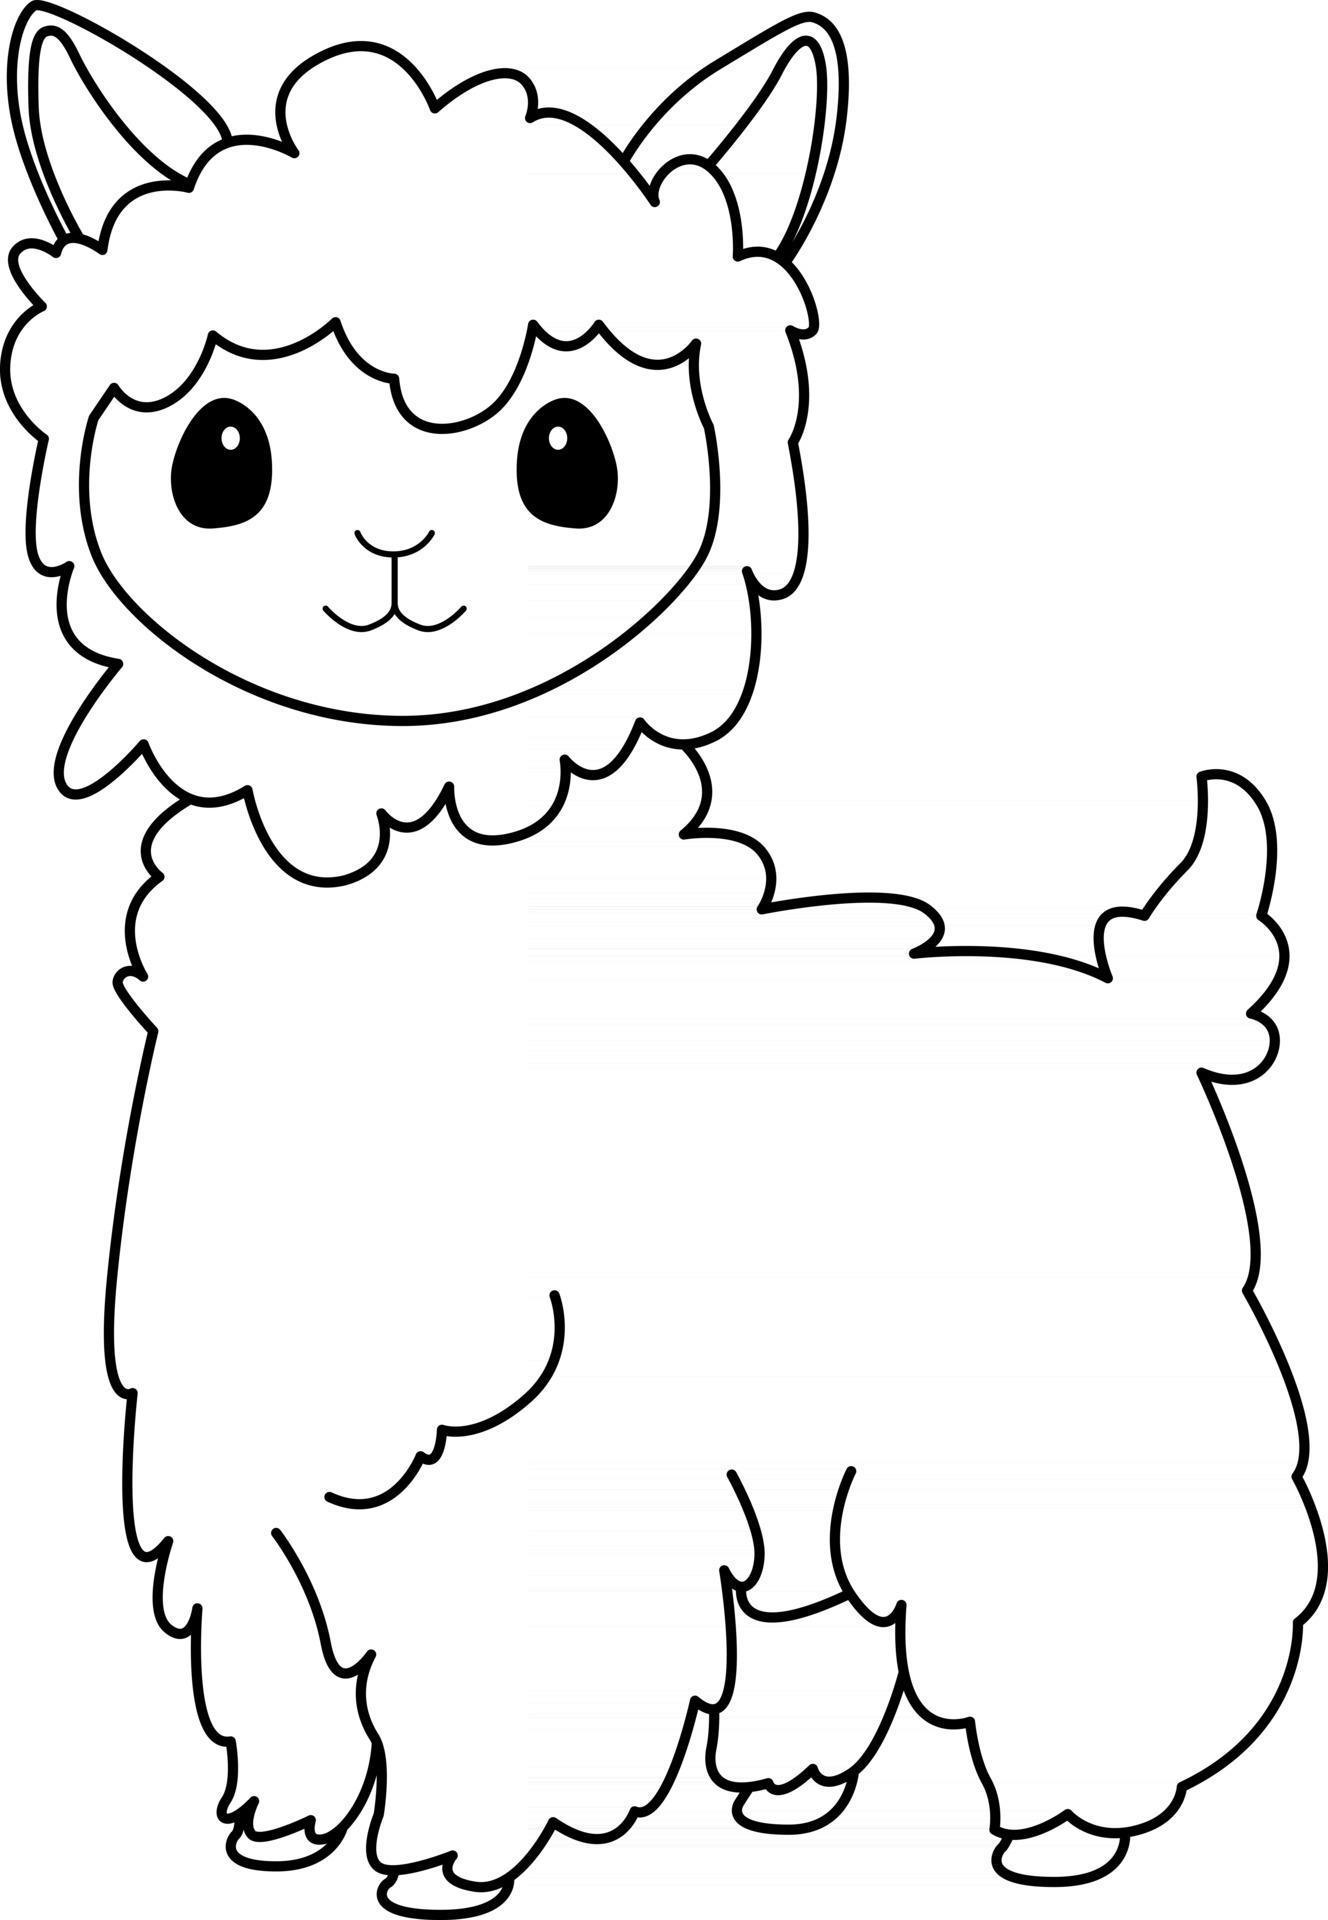 Llama Kids Coloring Page Great For Beginner Coloring Book 2506057 Vector Art At Vecteezy